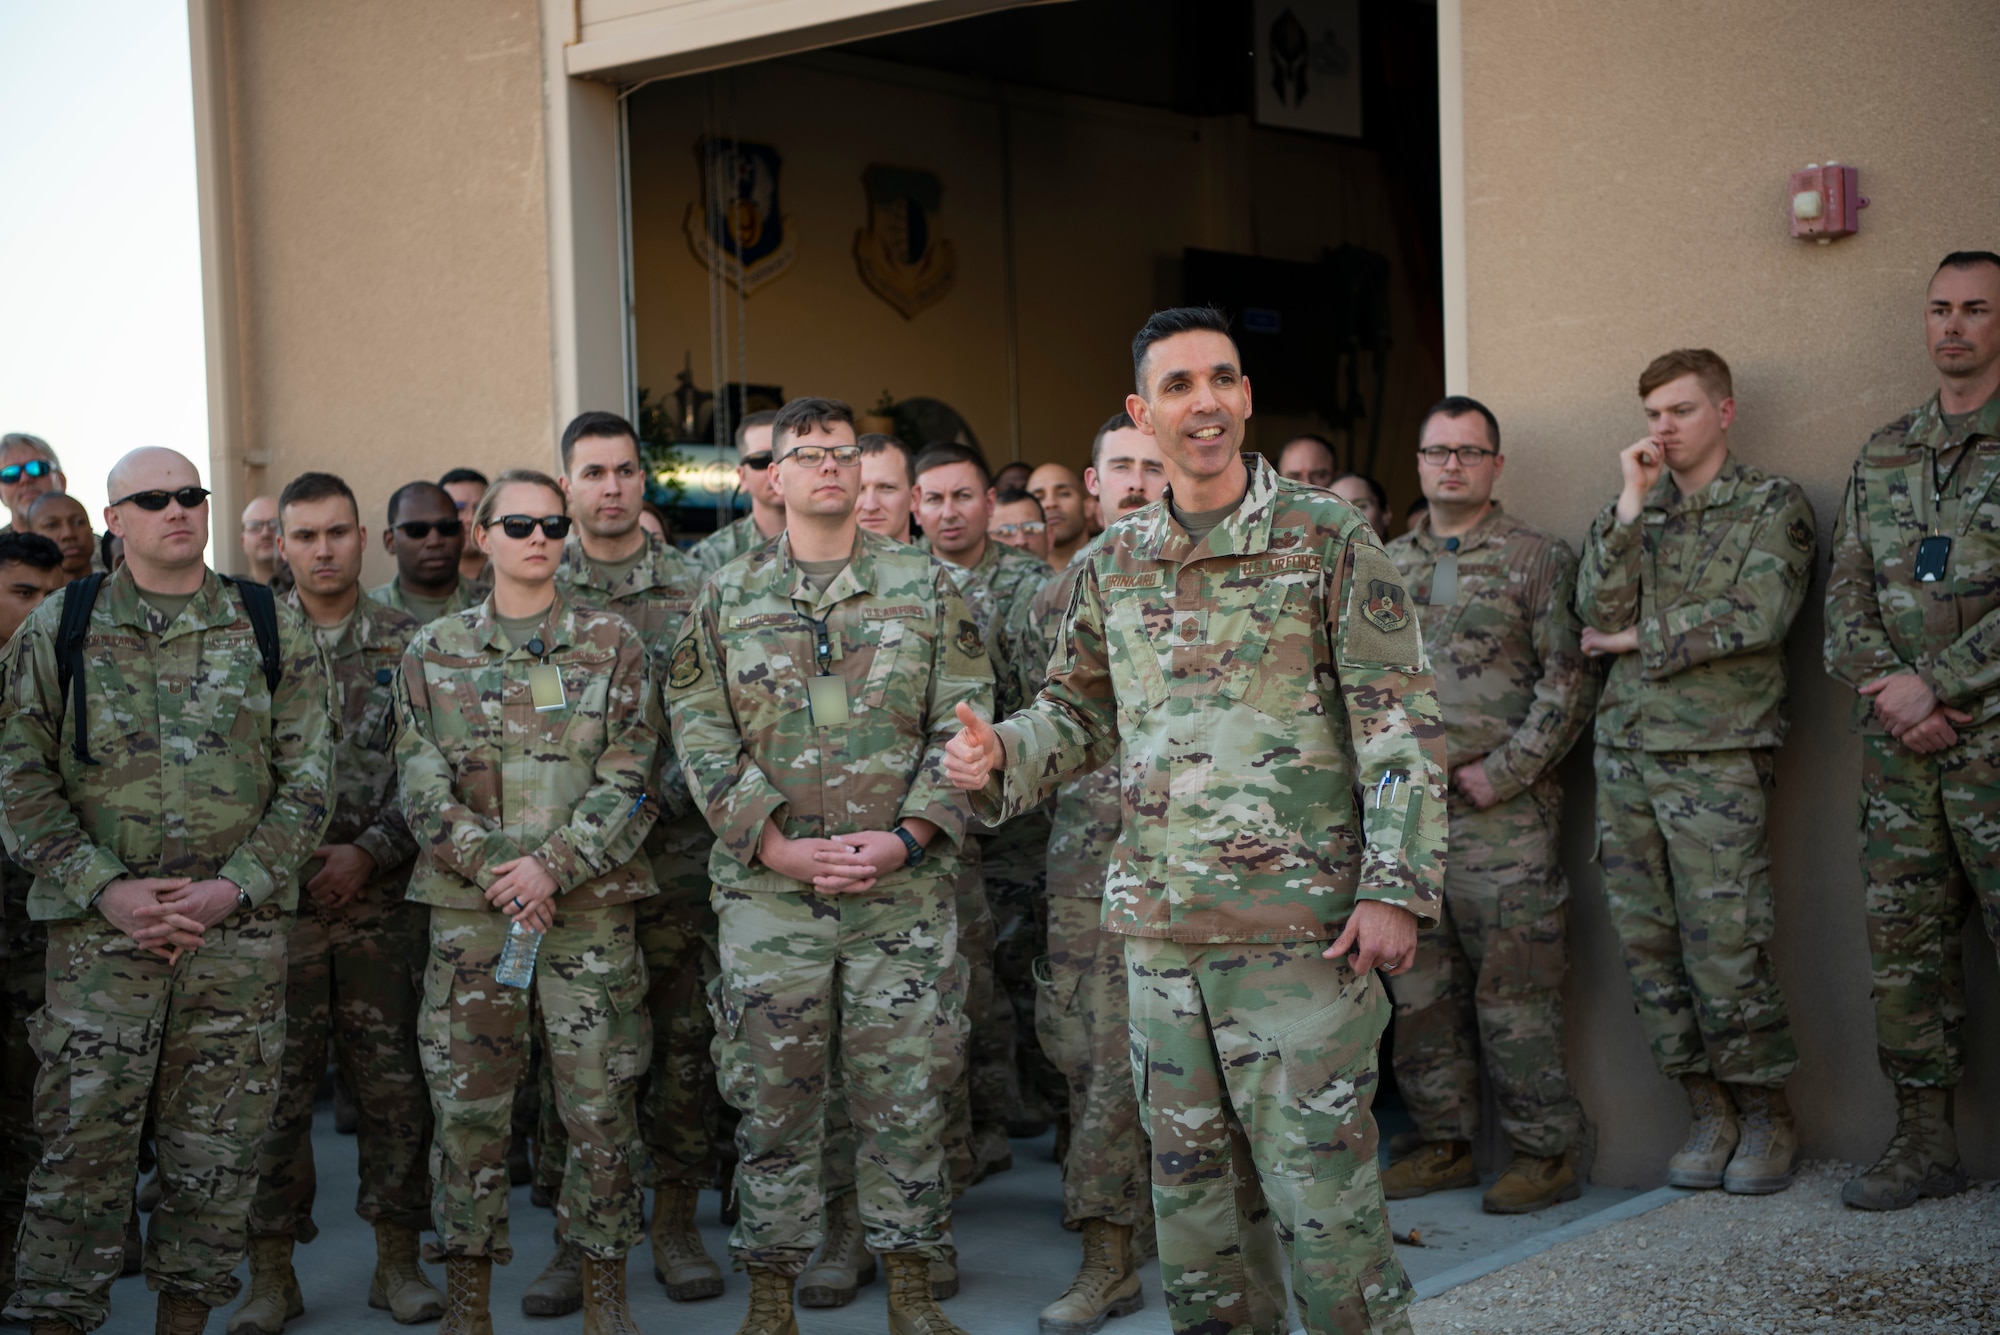 U.S. Air Force Chief Master Sgt. Shawn Drinkard, U.S. Air Forces Central Command command chief, speaks with AFCENT Airmen outside of the combined air operations center at Al Udeid Air Base, Qatar, March 6, 2020.